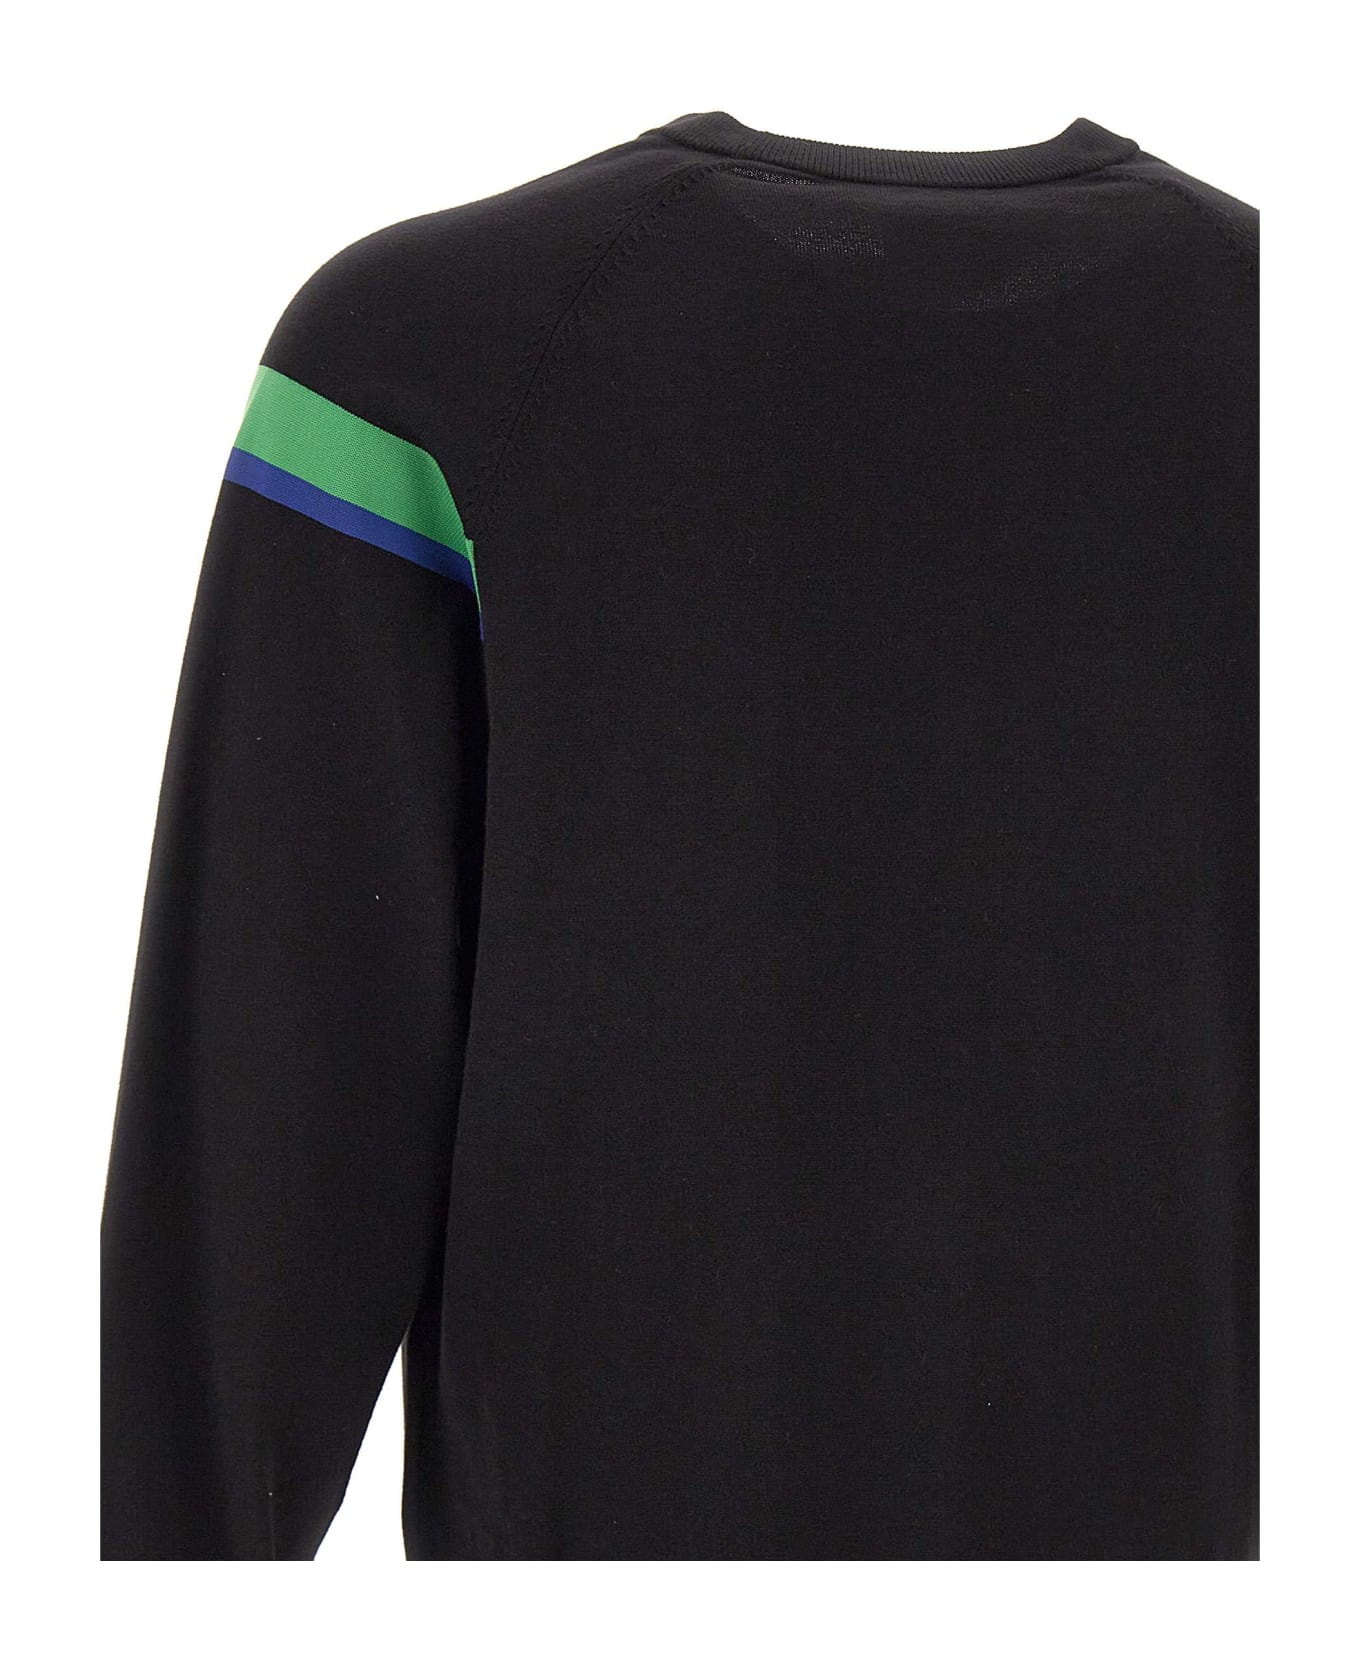 PS by Paul Smith Organic Cotton Sweater - Nero